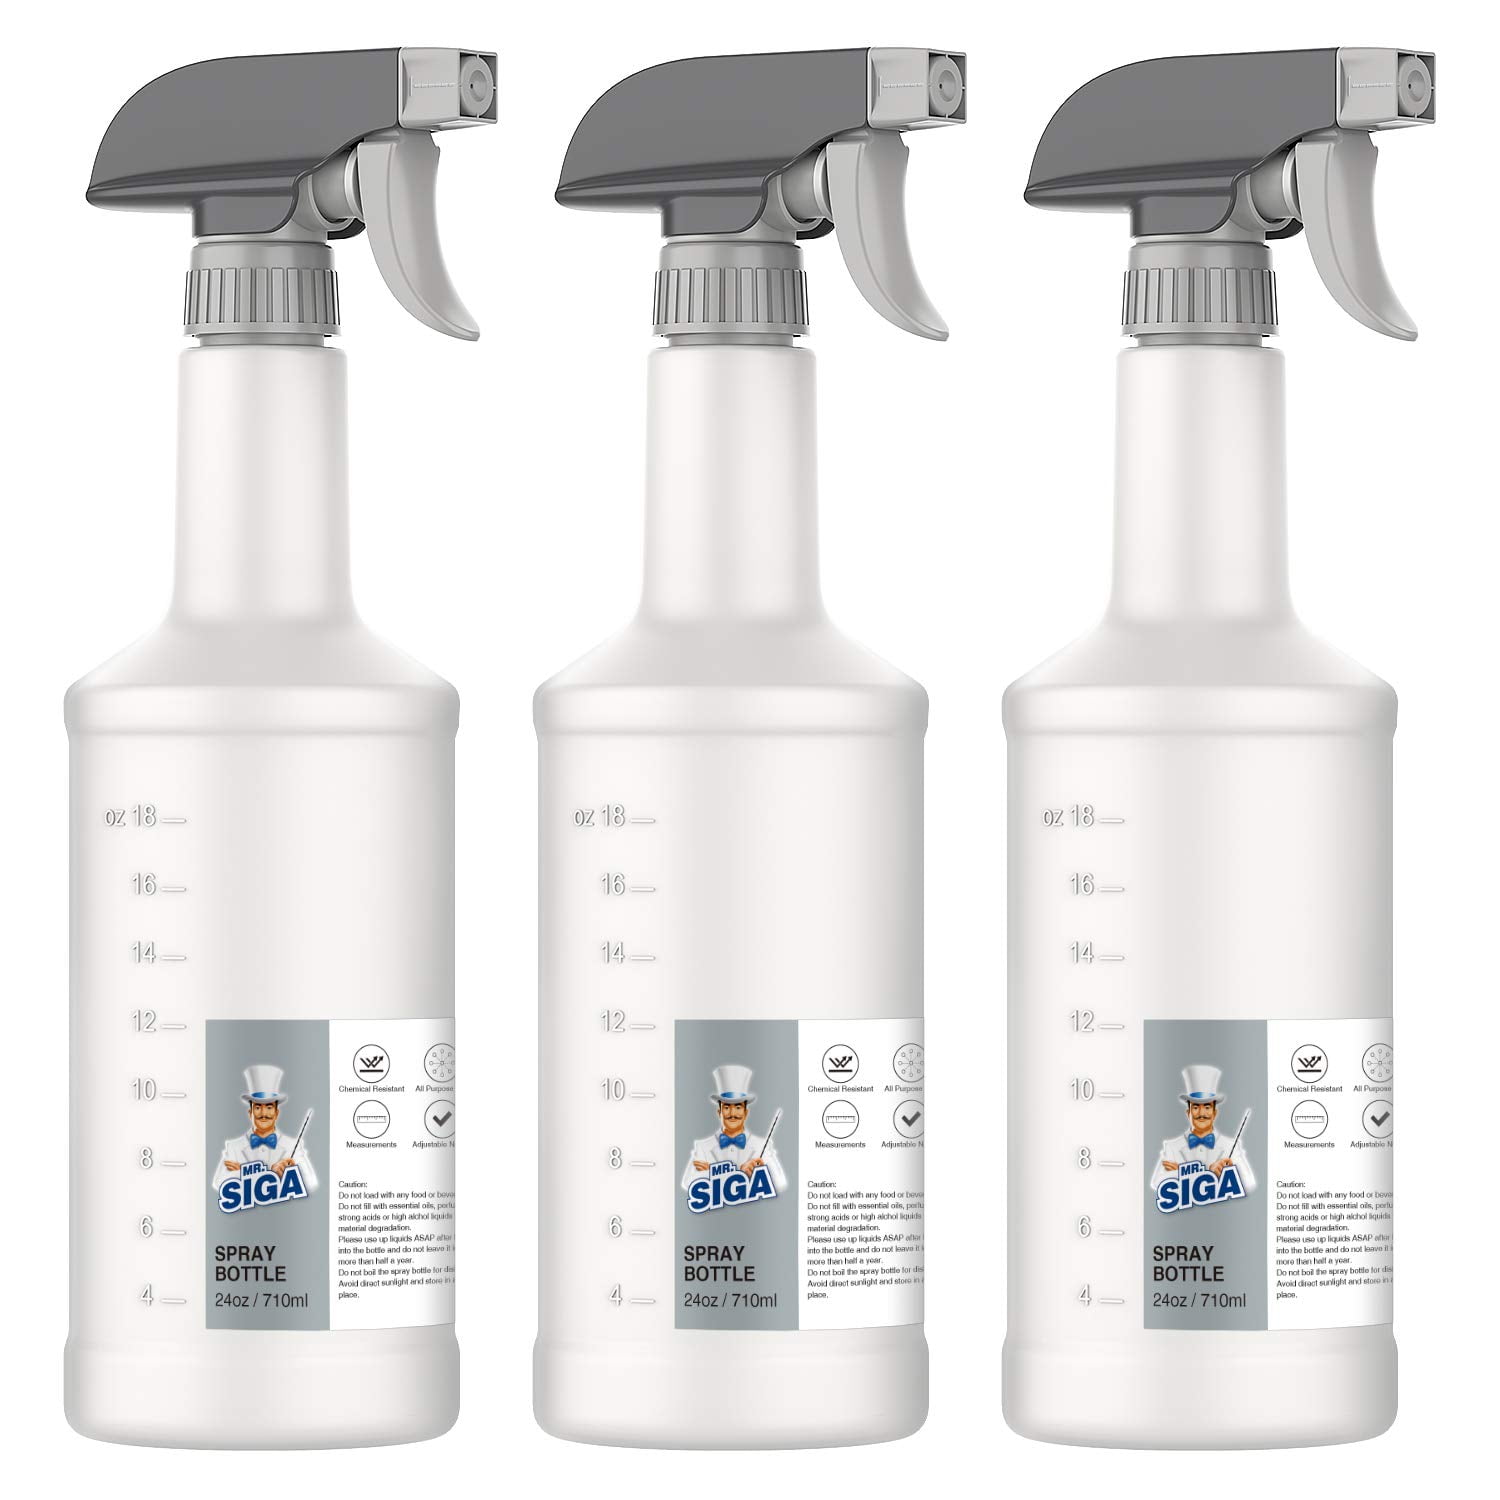 Car Detailing Spray Bottles, Dilution Bottle for Cleaning Solutions